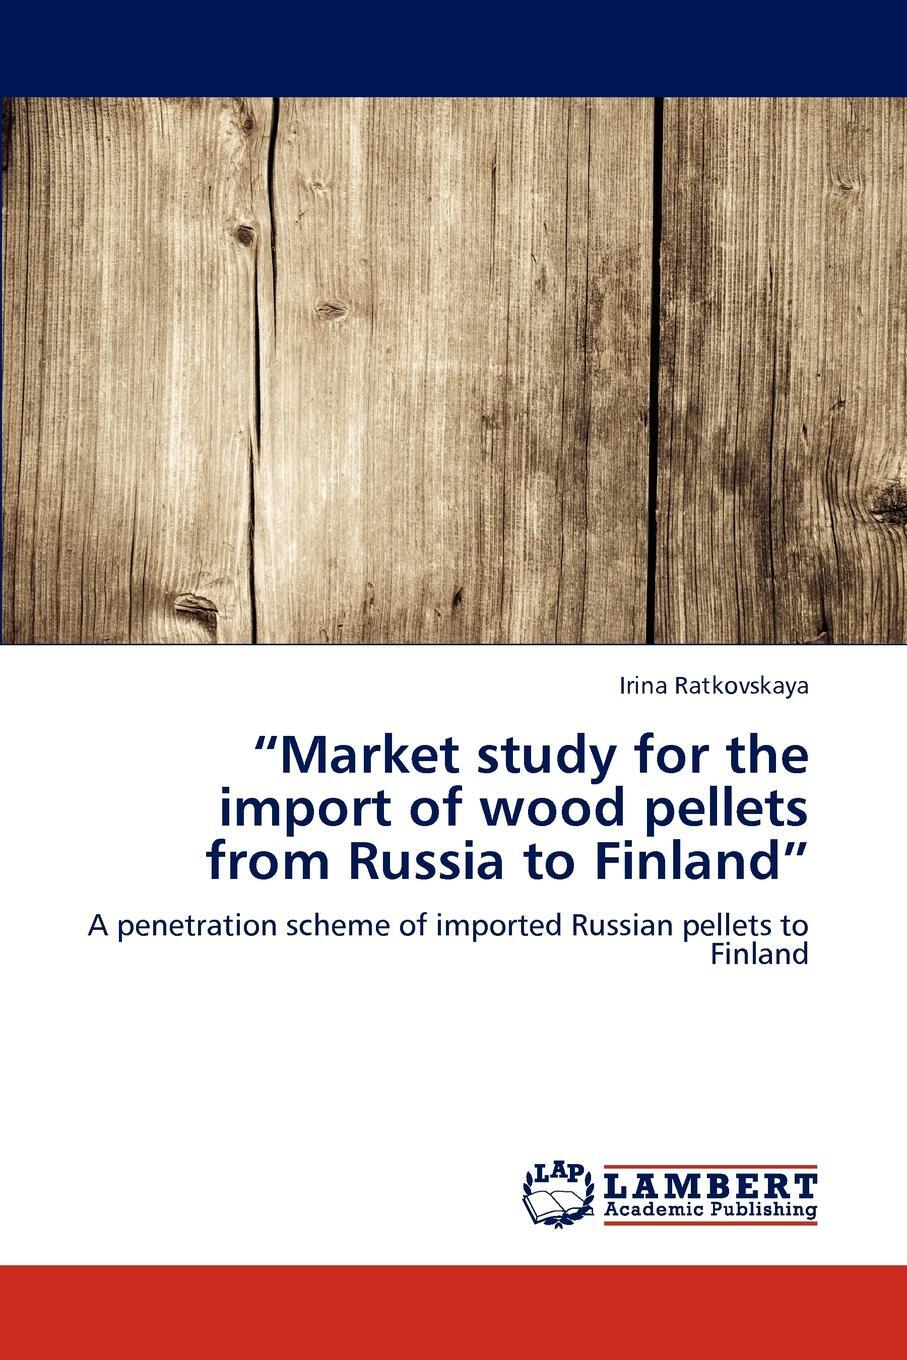 фото "Market Study for the Import of Wood Pellets from Russia to Finland"